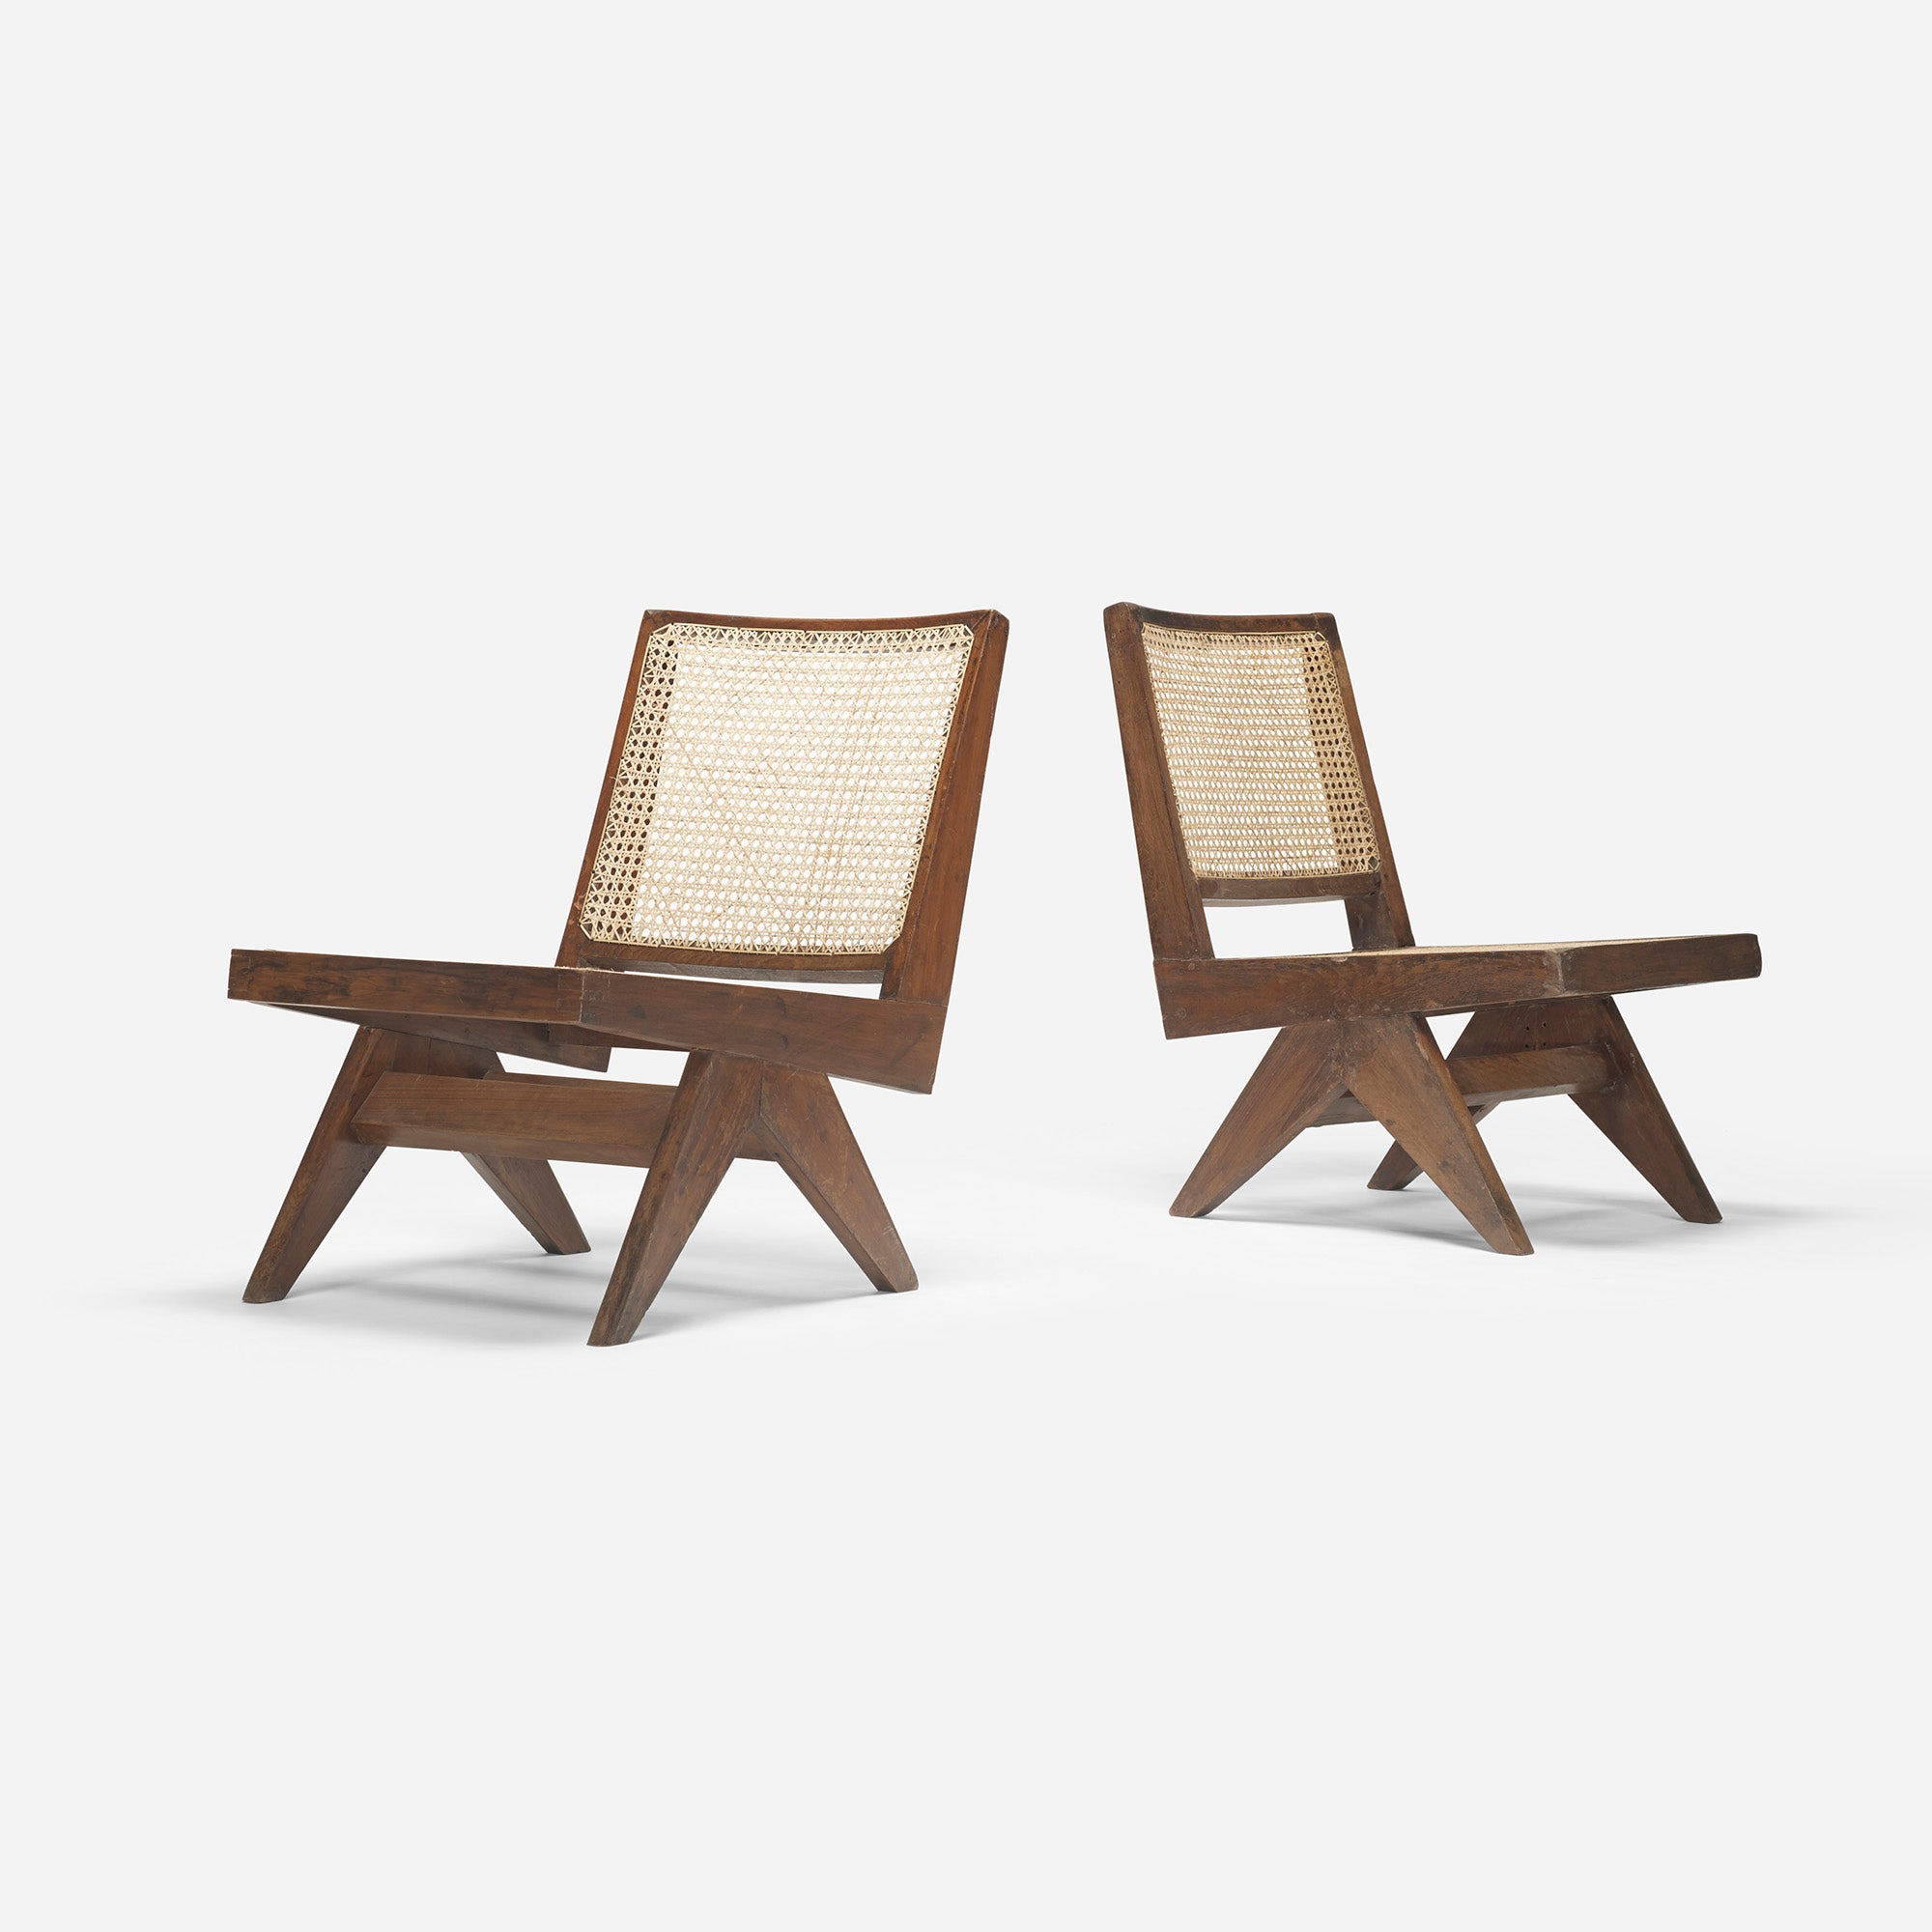 Pair of lounge chairs from Chandigarh, India by Pierre Jeanneret